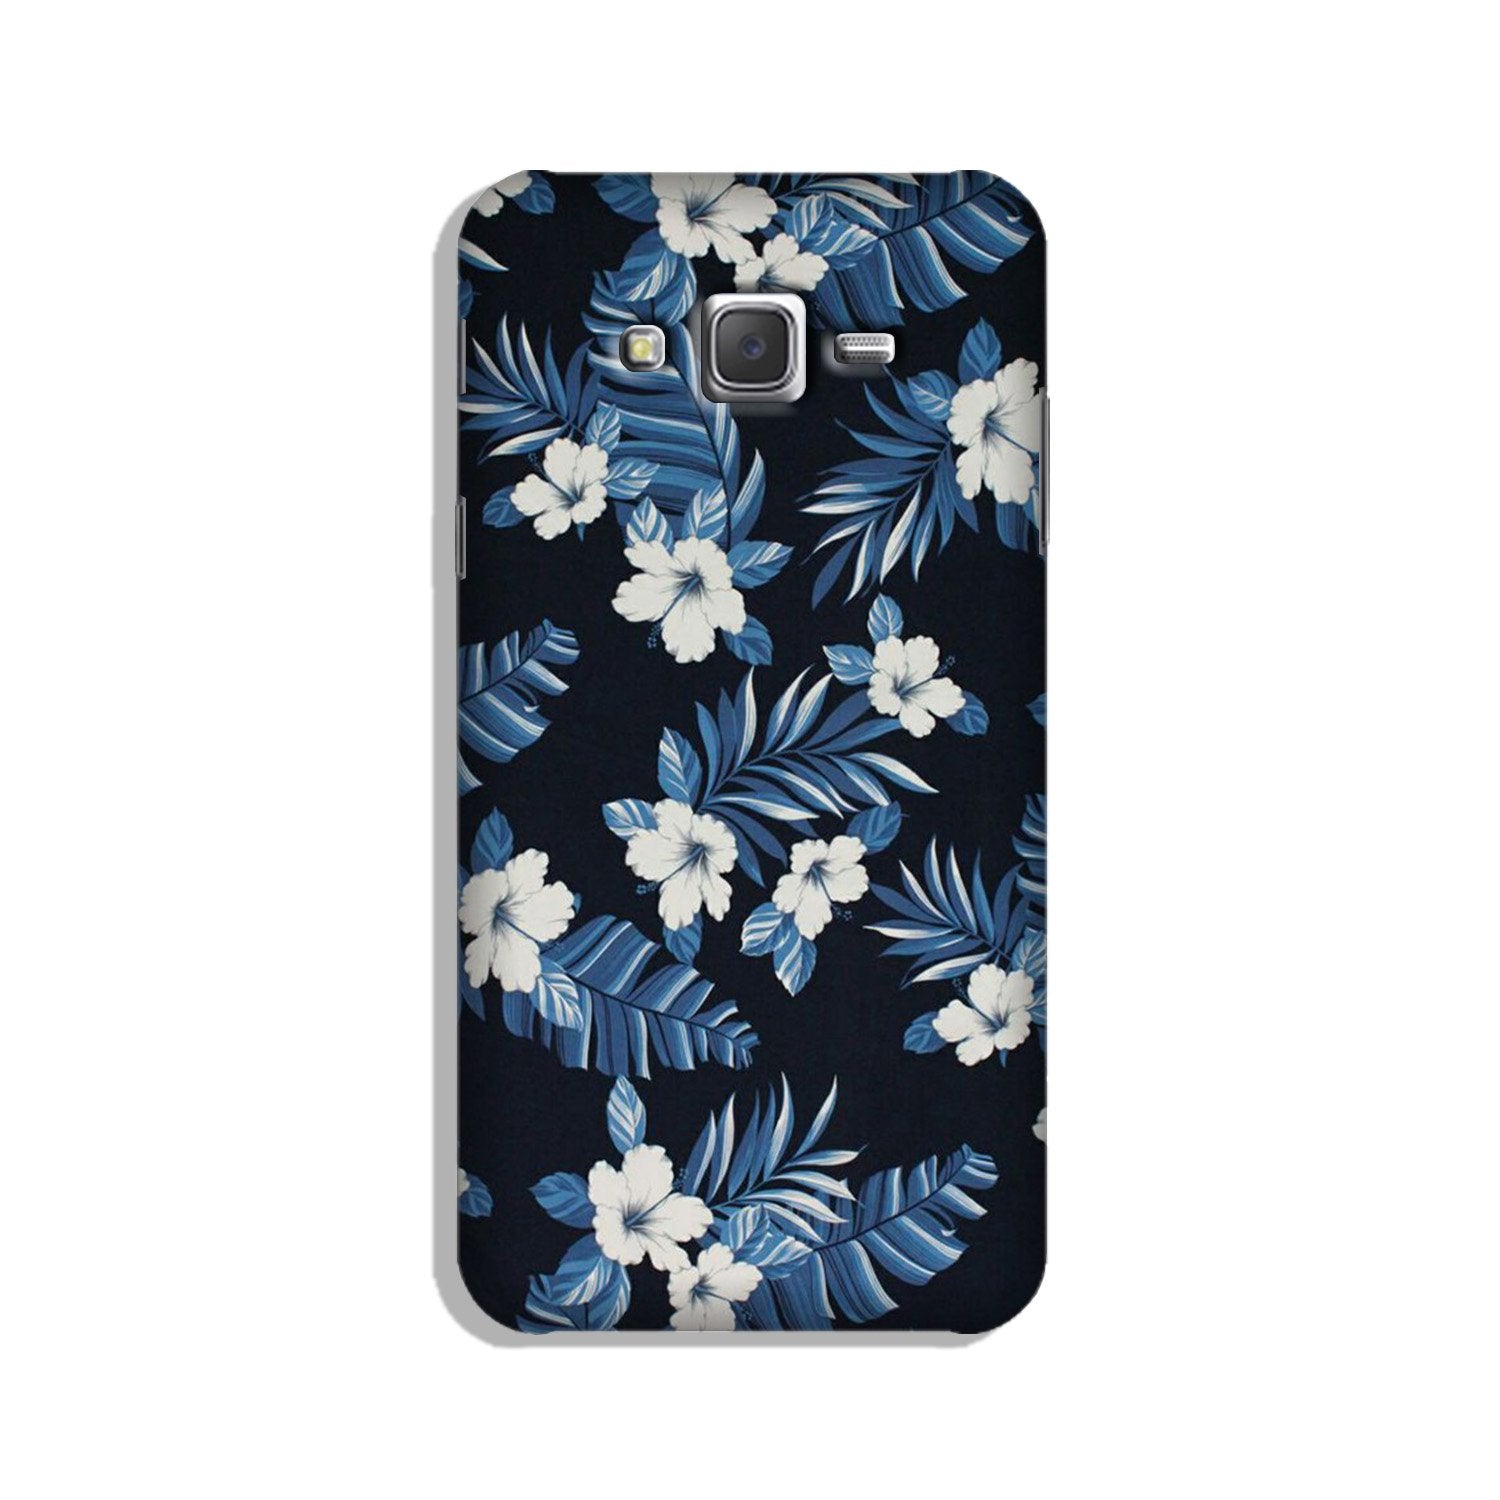 White flowers Blue Background2 Case for Galaxy J3 (2015)